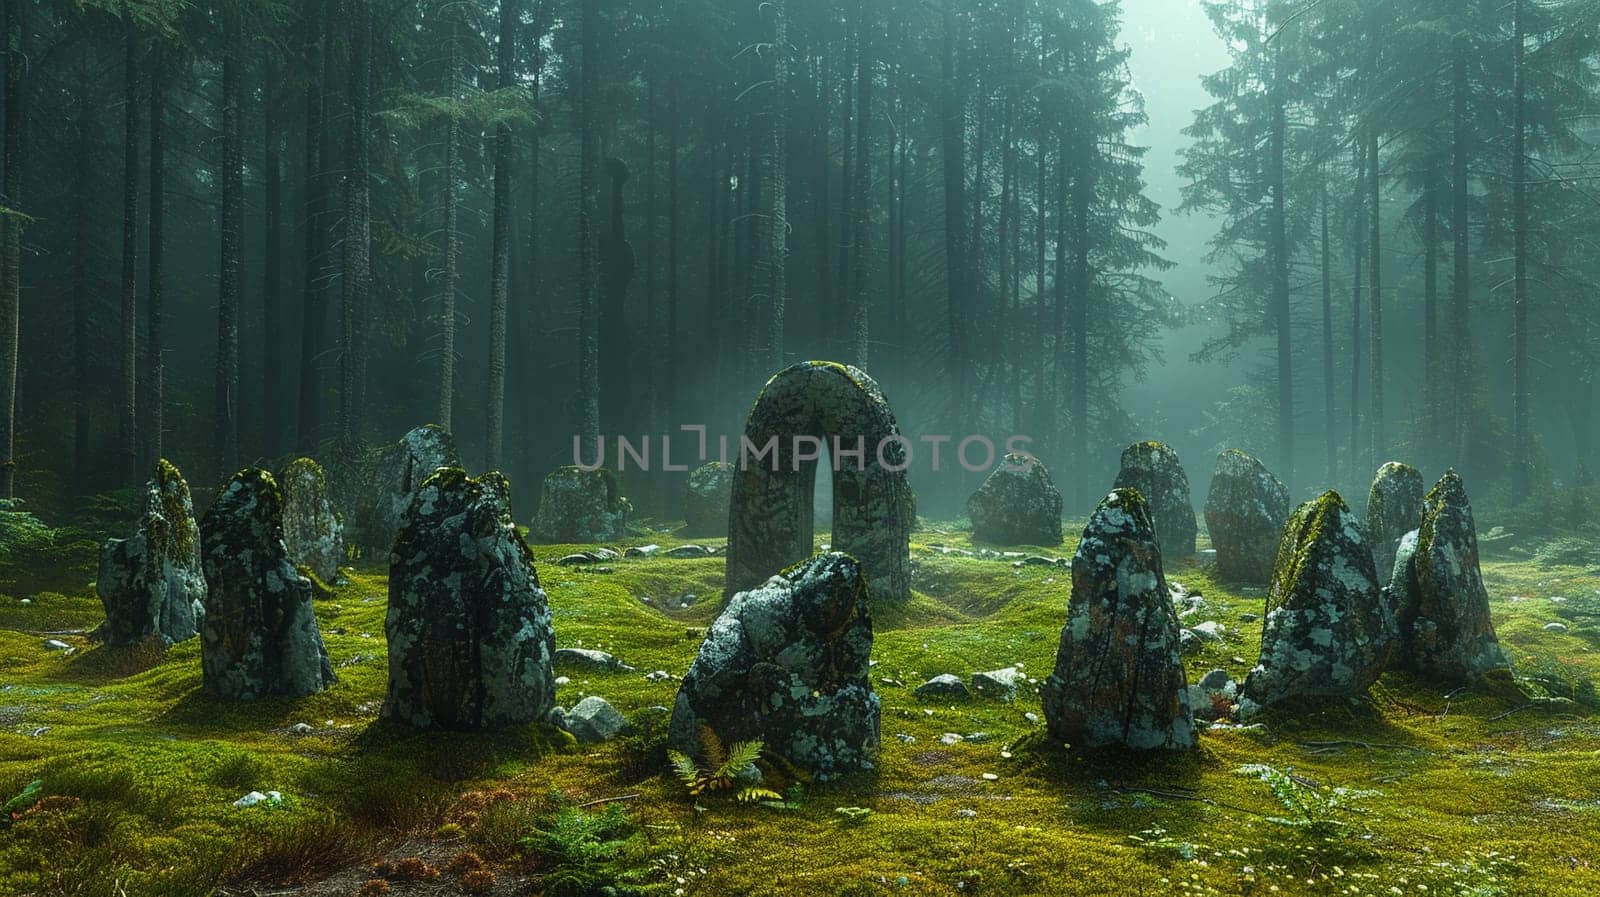 Druidic Circles Standing Silent in a Forest Clearing, The stones blur into a sacred space, rooted in nature and the old ways.